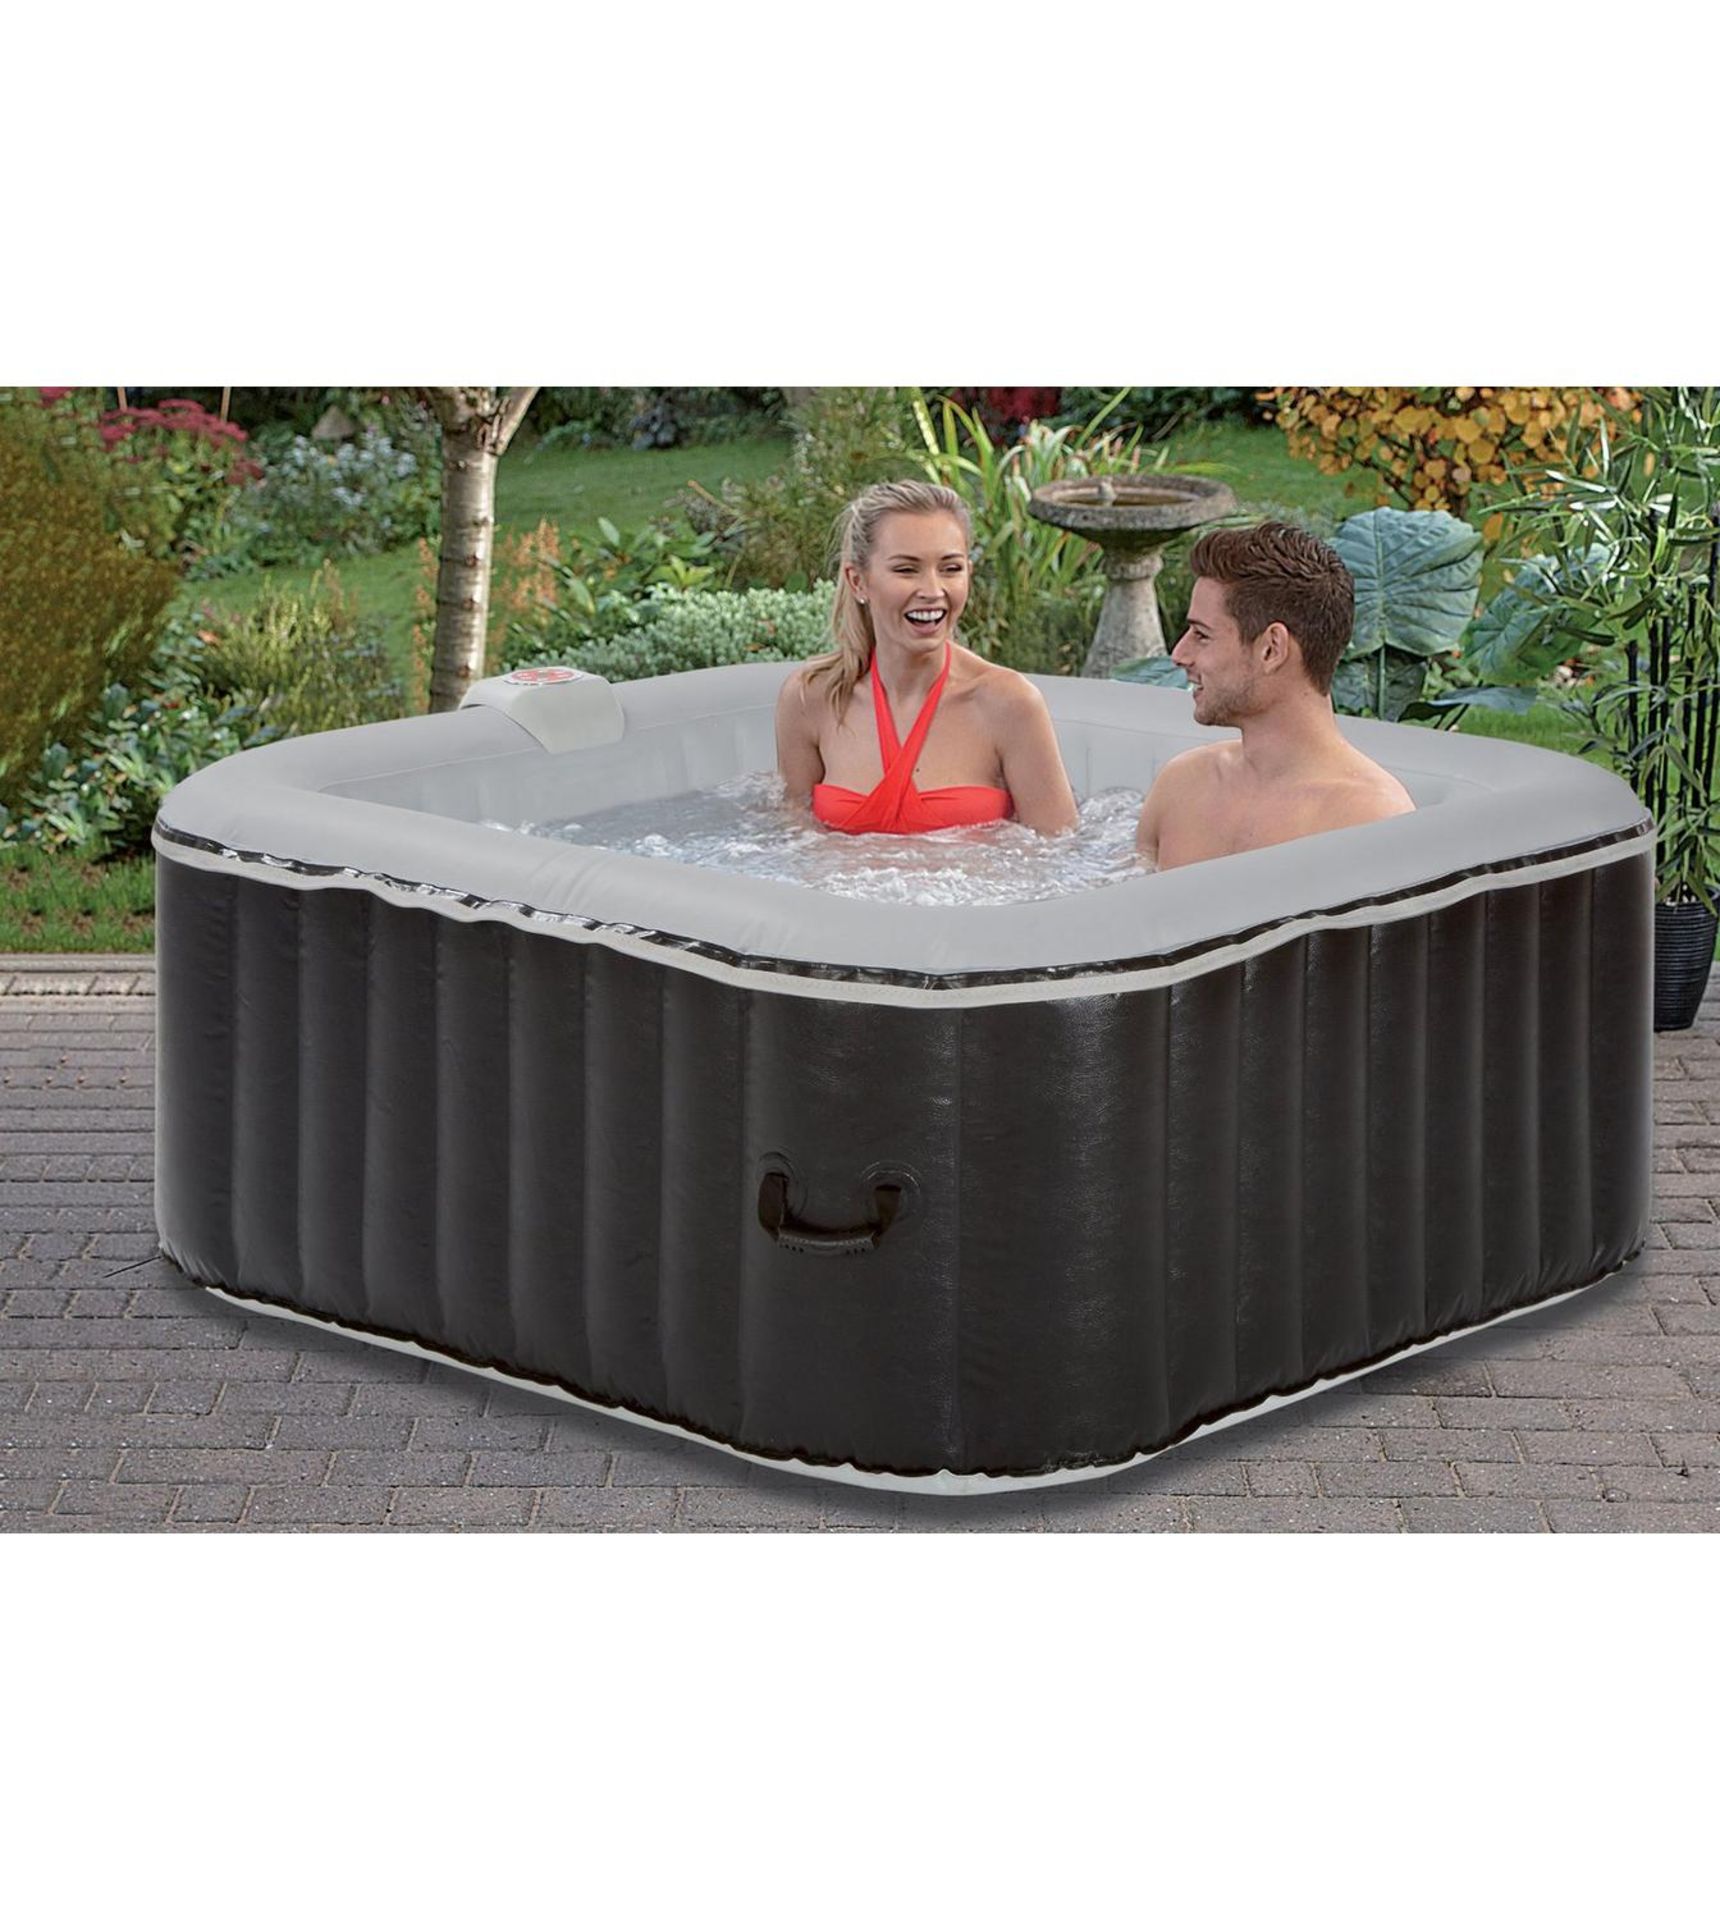 1 / BOXED HEATED INFLATABLE 4 SEATER SPA /RRP/ £50